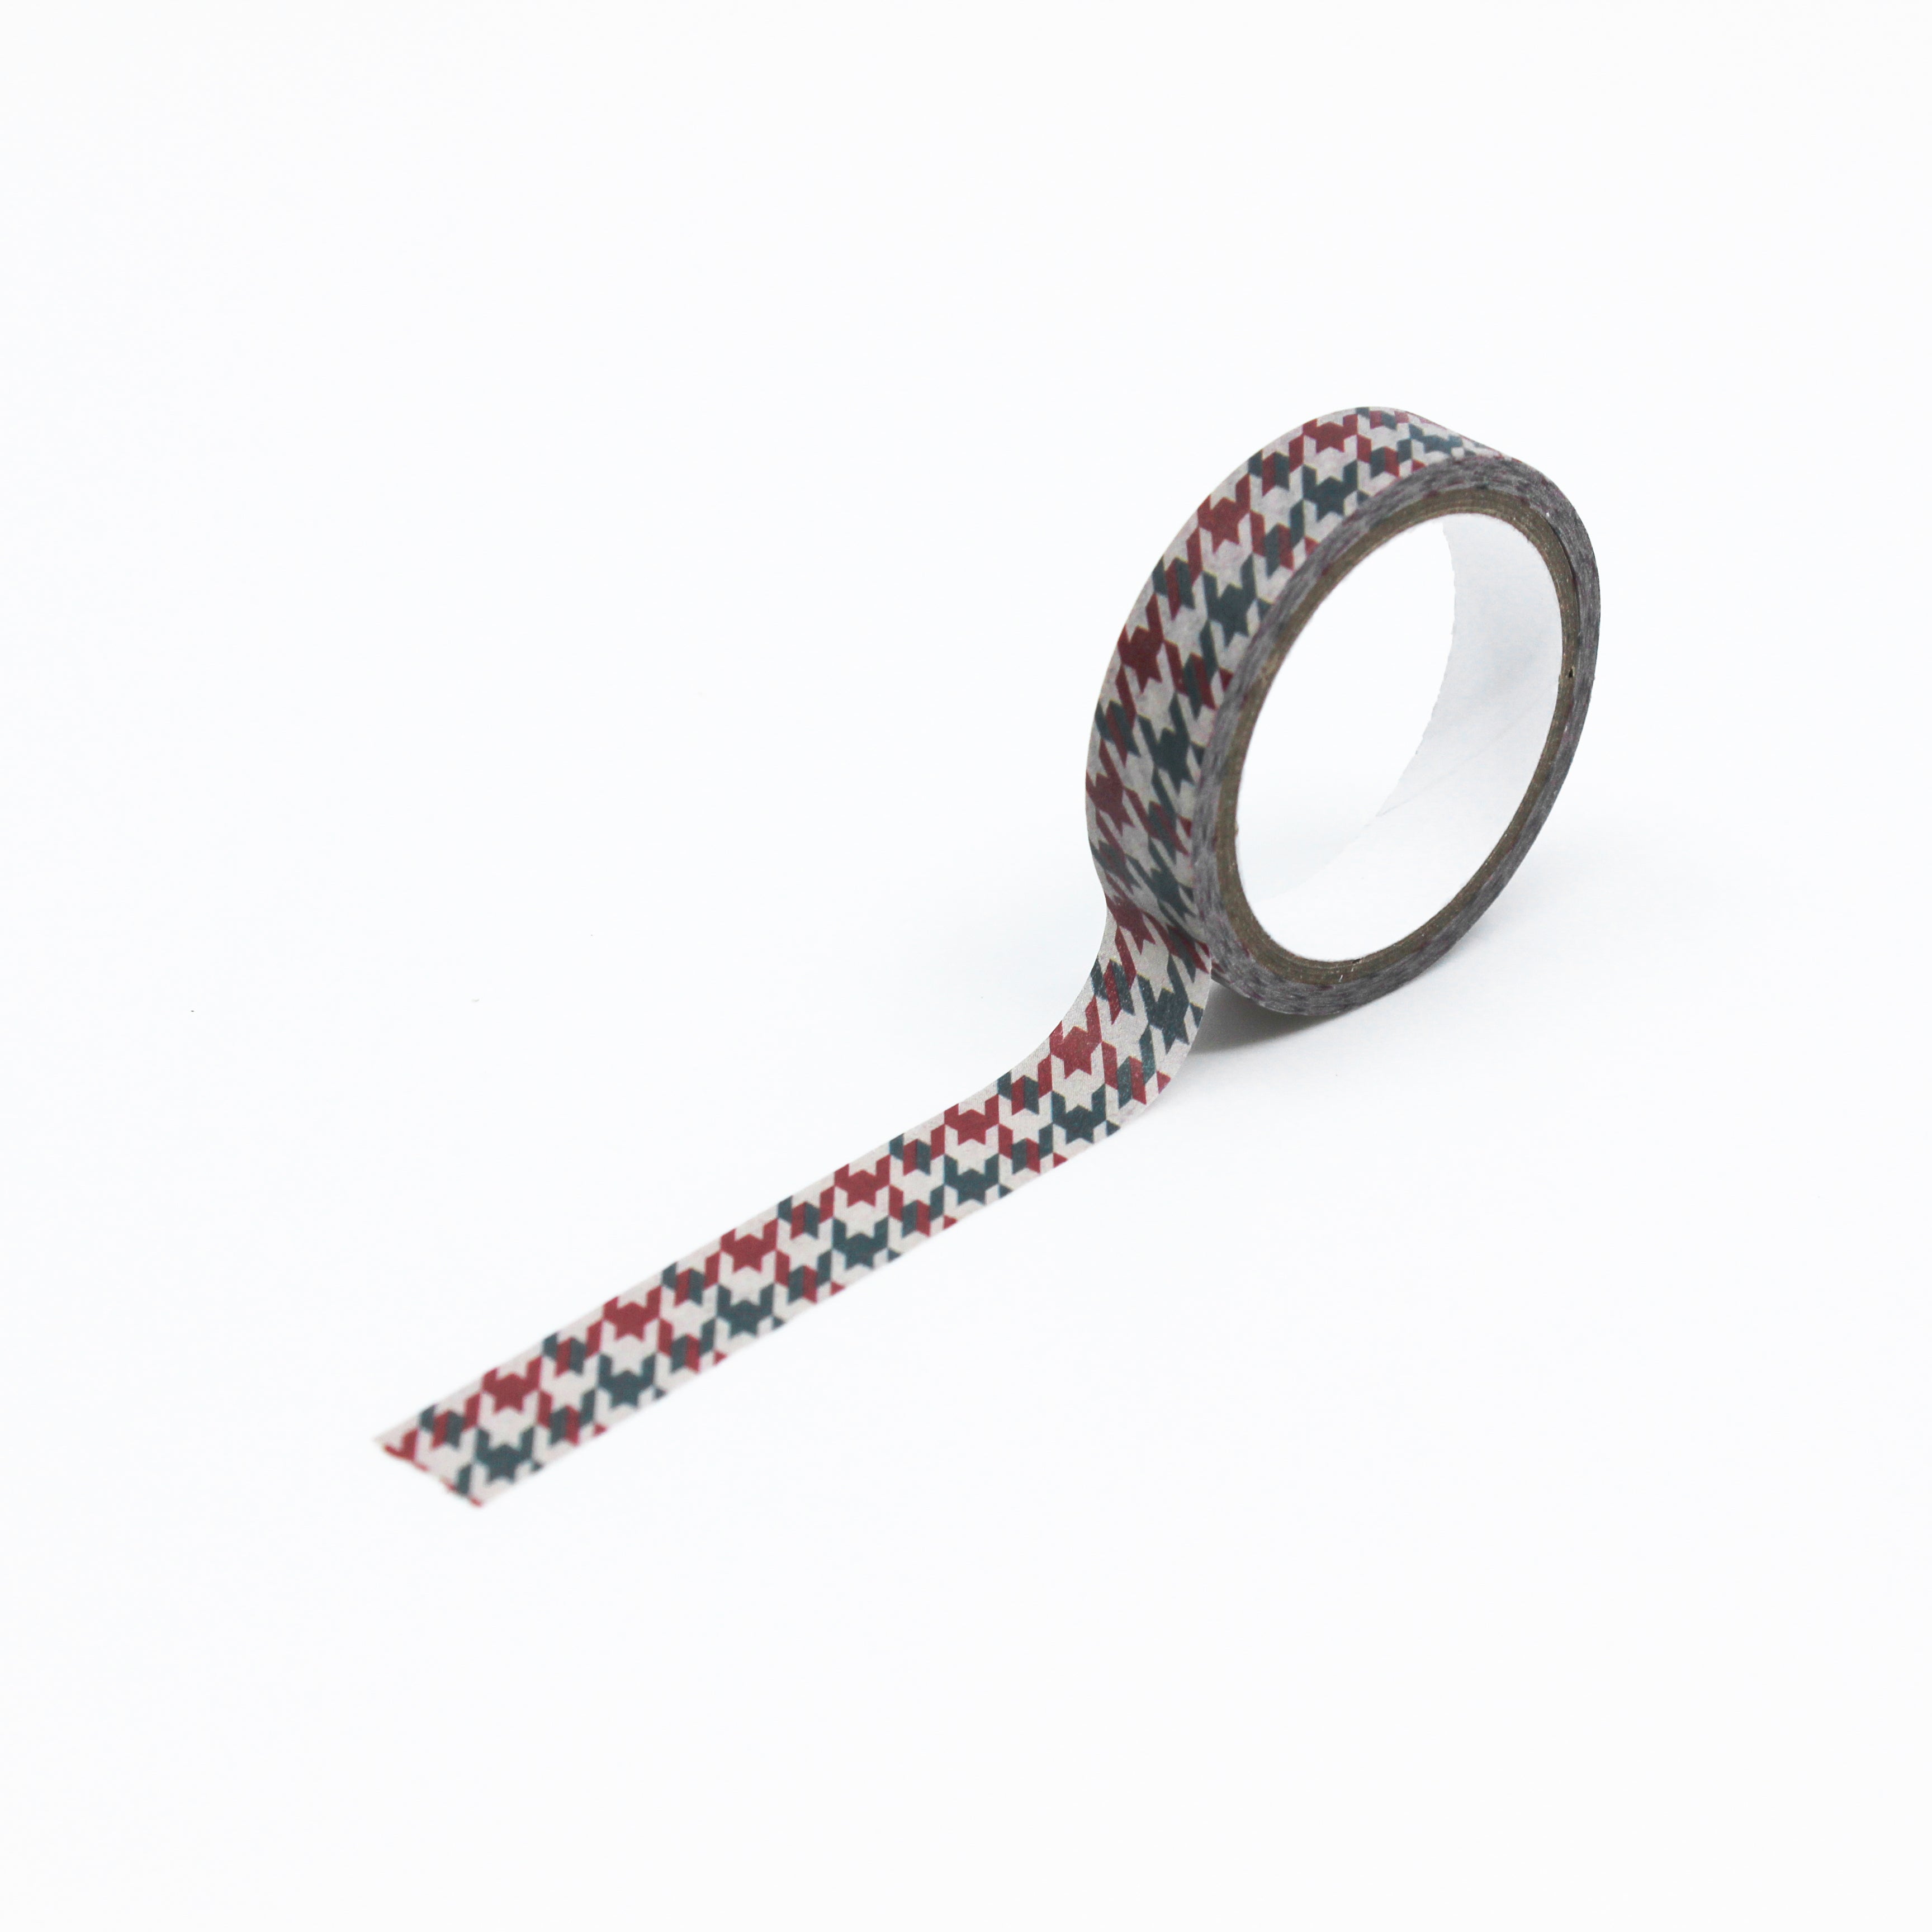 Infuse your creations with the elegance of the season using our washi tape adorned with Christmas houndstooth patterns, capturing the sophistication and charm of holiday fashion. This tape is sold at BBB Supplies Craft Shop.